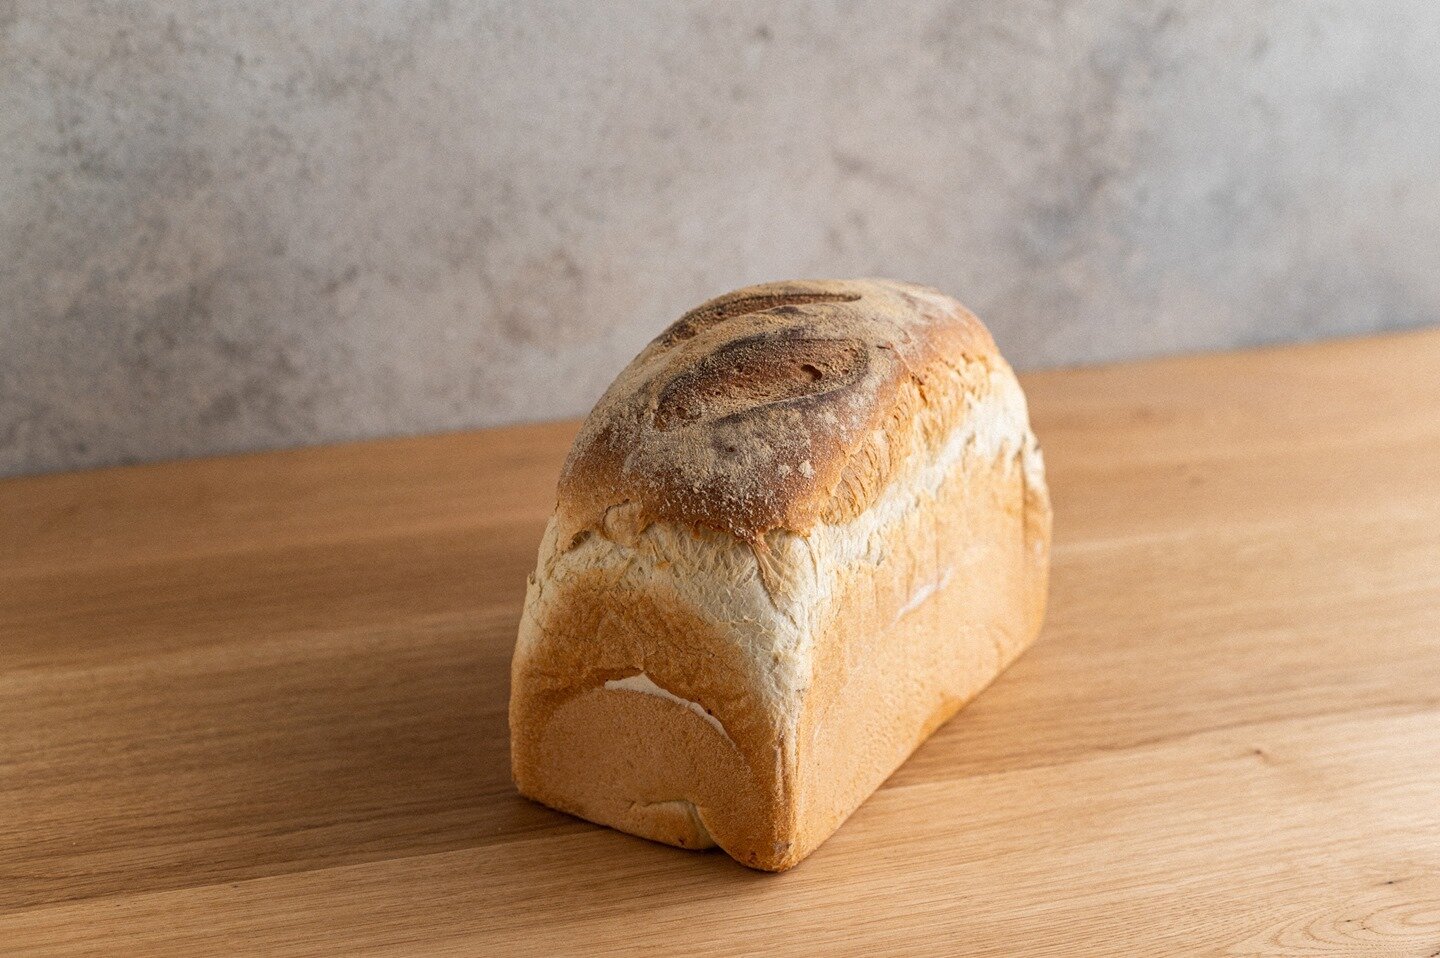 Our little bakery is in Symondsbury, just less than two miles away from our shop. Our bakers have perfected the recipes for our scrumptious loaves, savoury &amp; sweet treats for you to enjoy.⁠
⁠
⁠
#Risebakestore #Risebakery #Bakery #freshlybaked ⁠
 